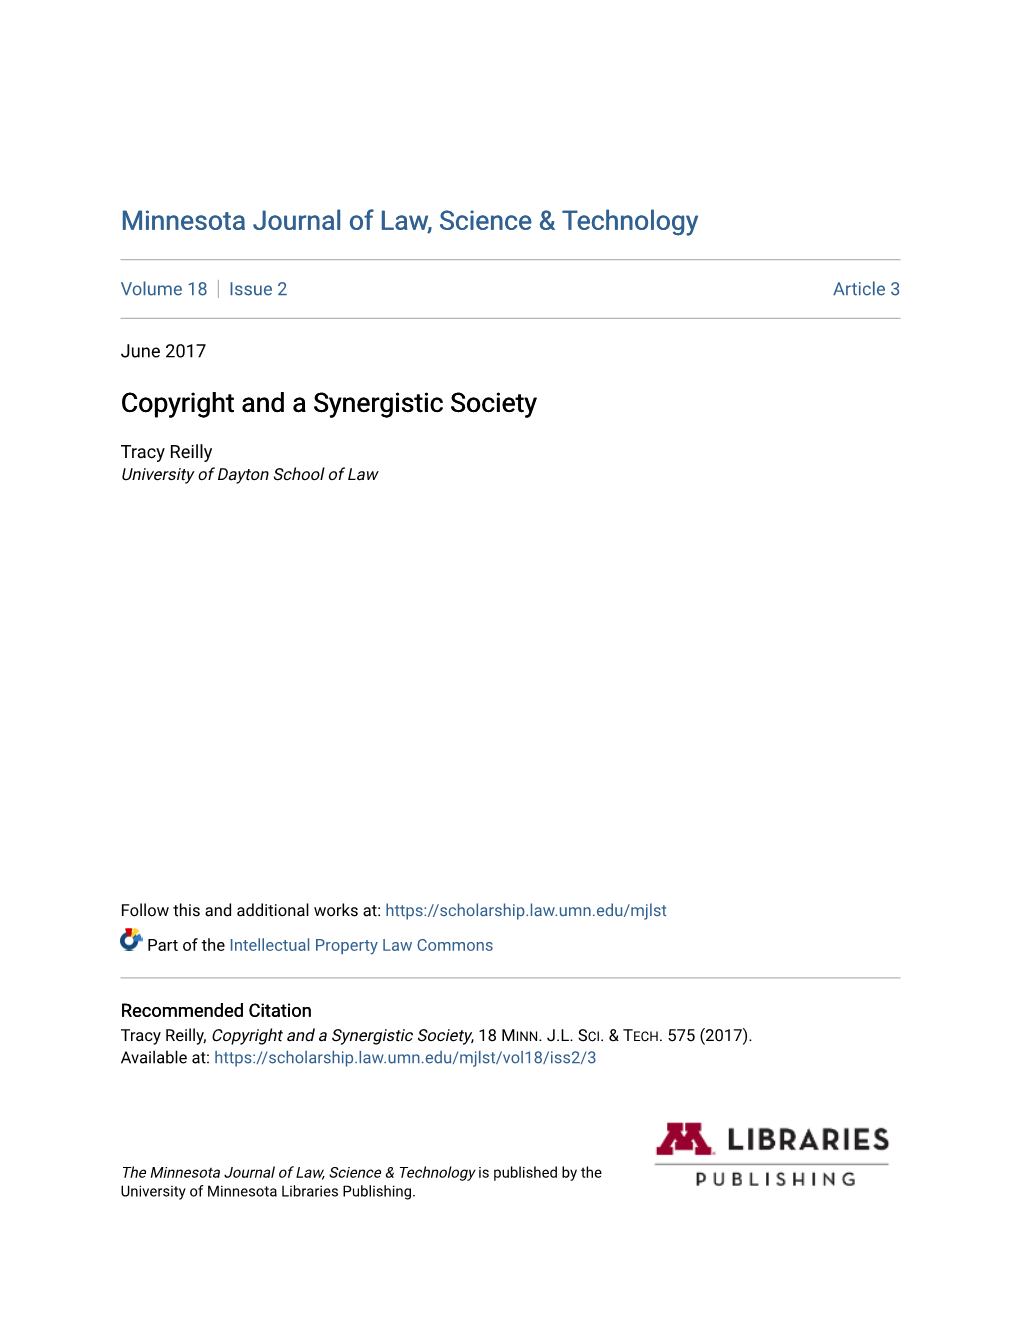 Copyright and a Synergistic Society